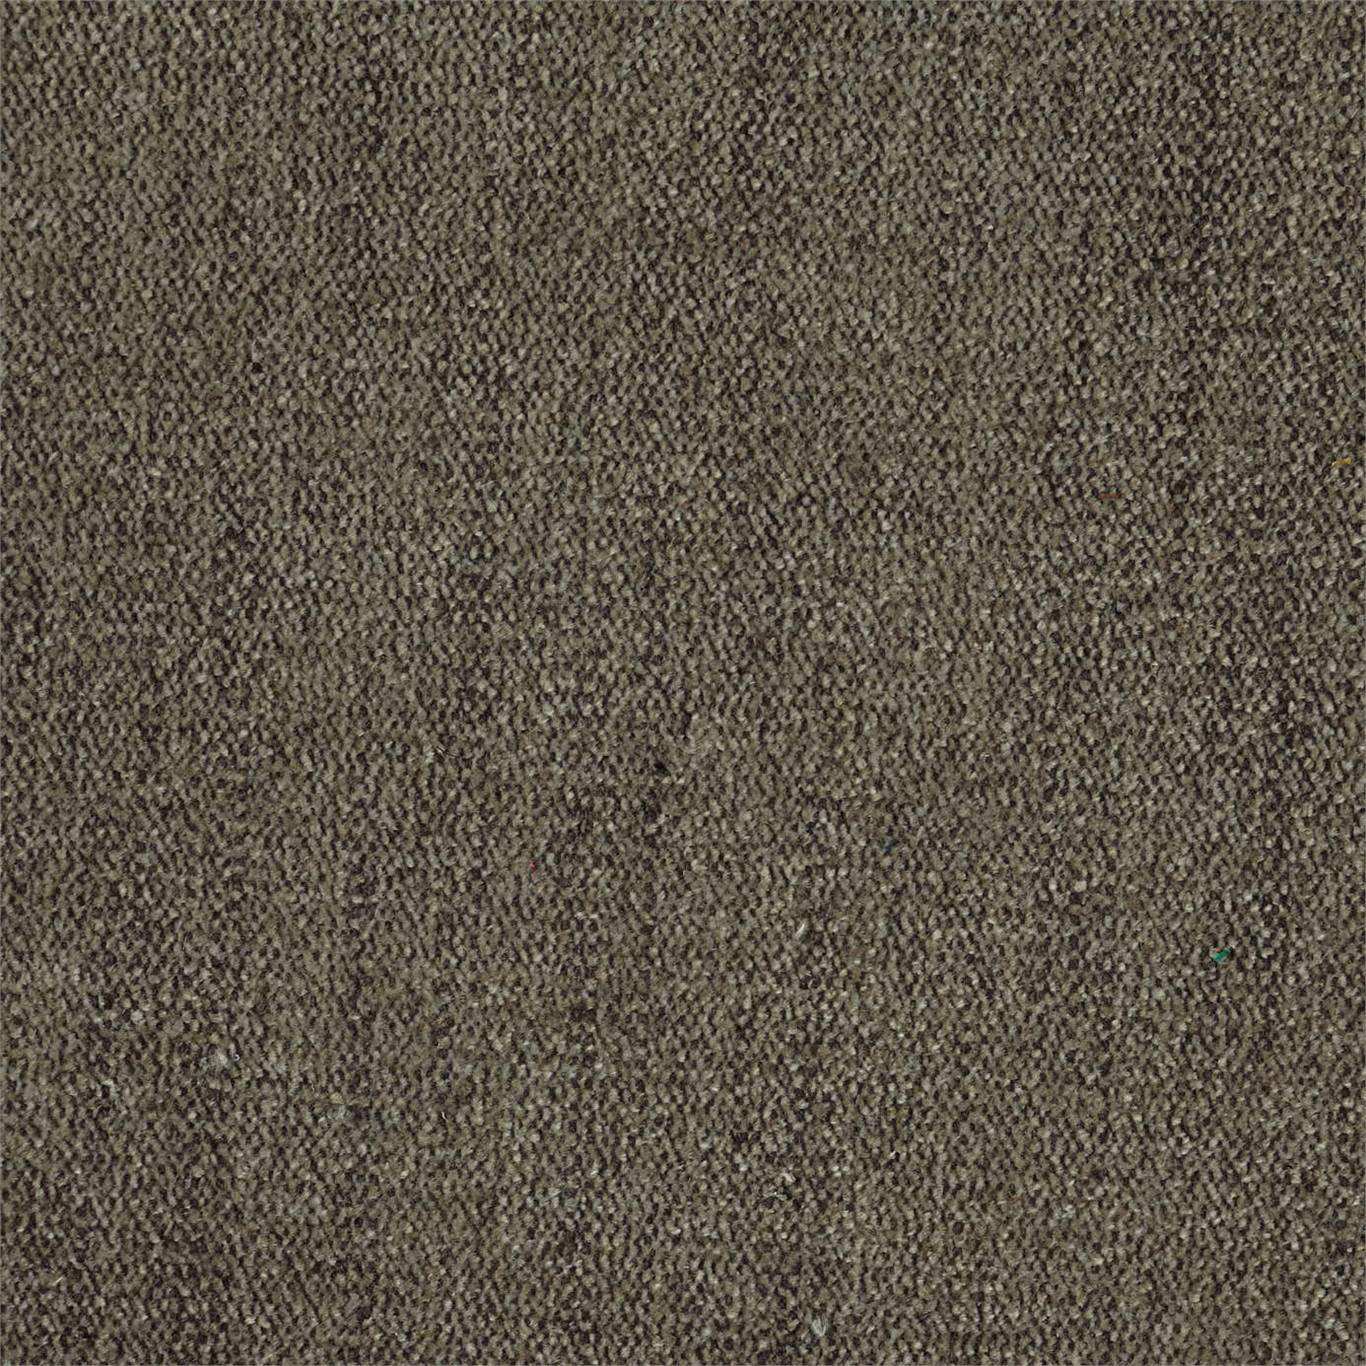 Marly Chenille Sable Fabric by HAR